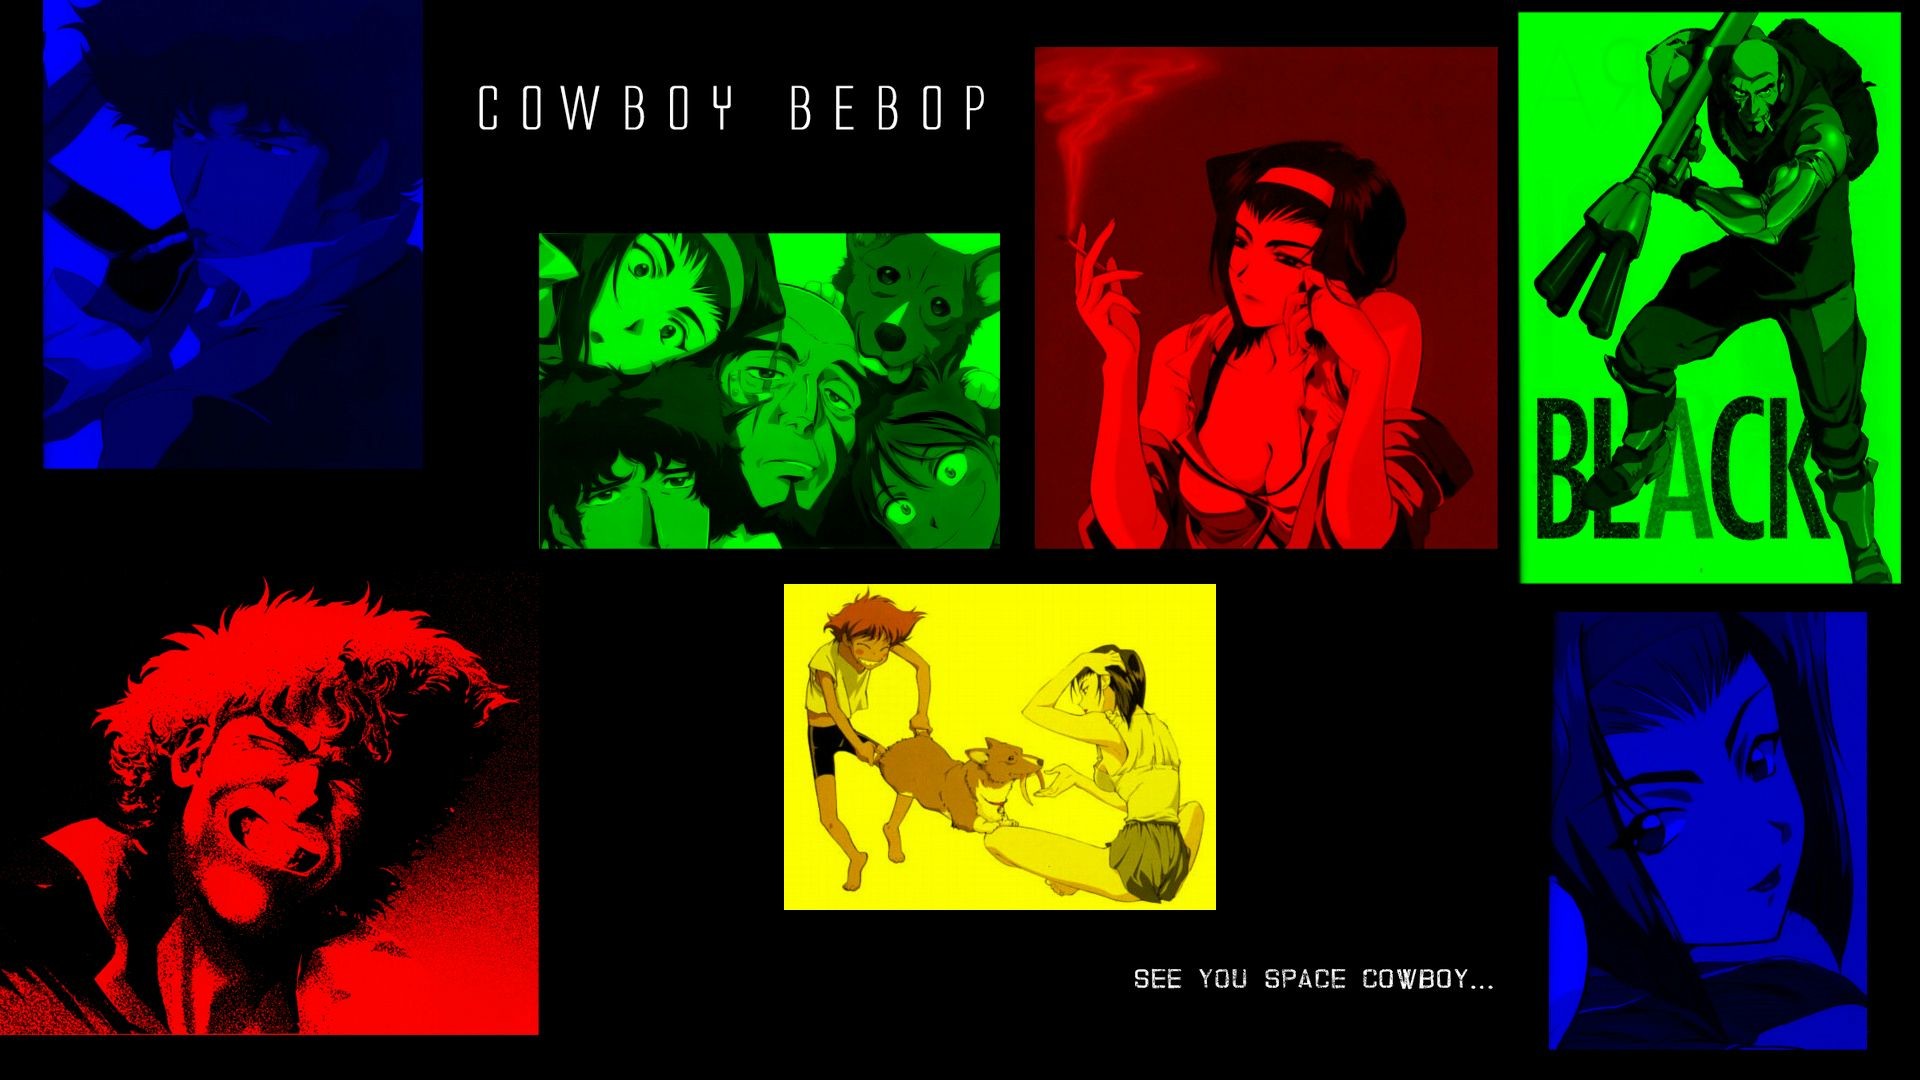 Cowboy Bebop Wallpaper collection. by TheClassyGentlemanMar 28 2014. Load 5 more images Grid view